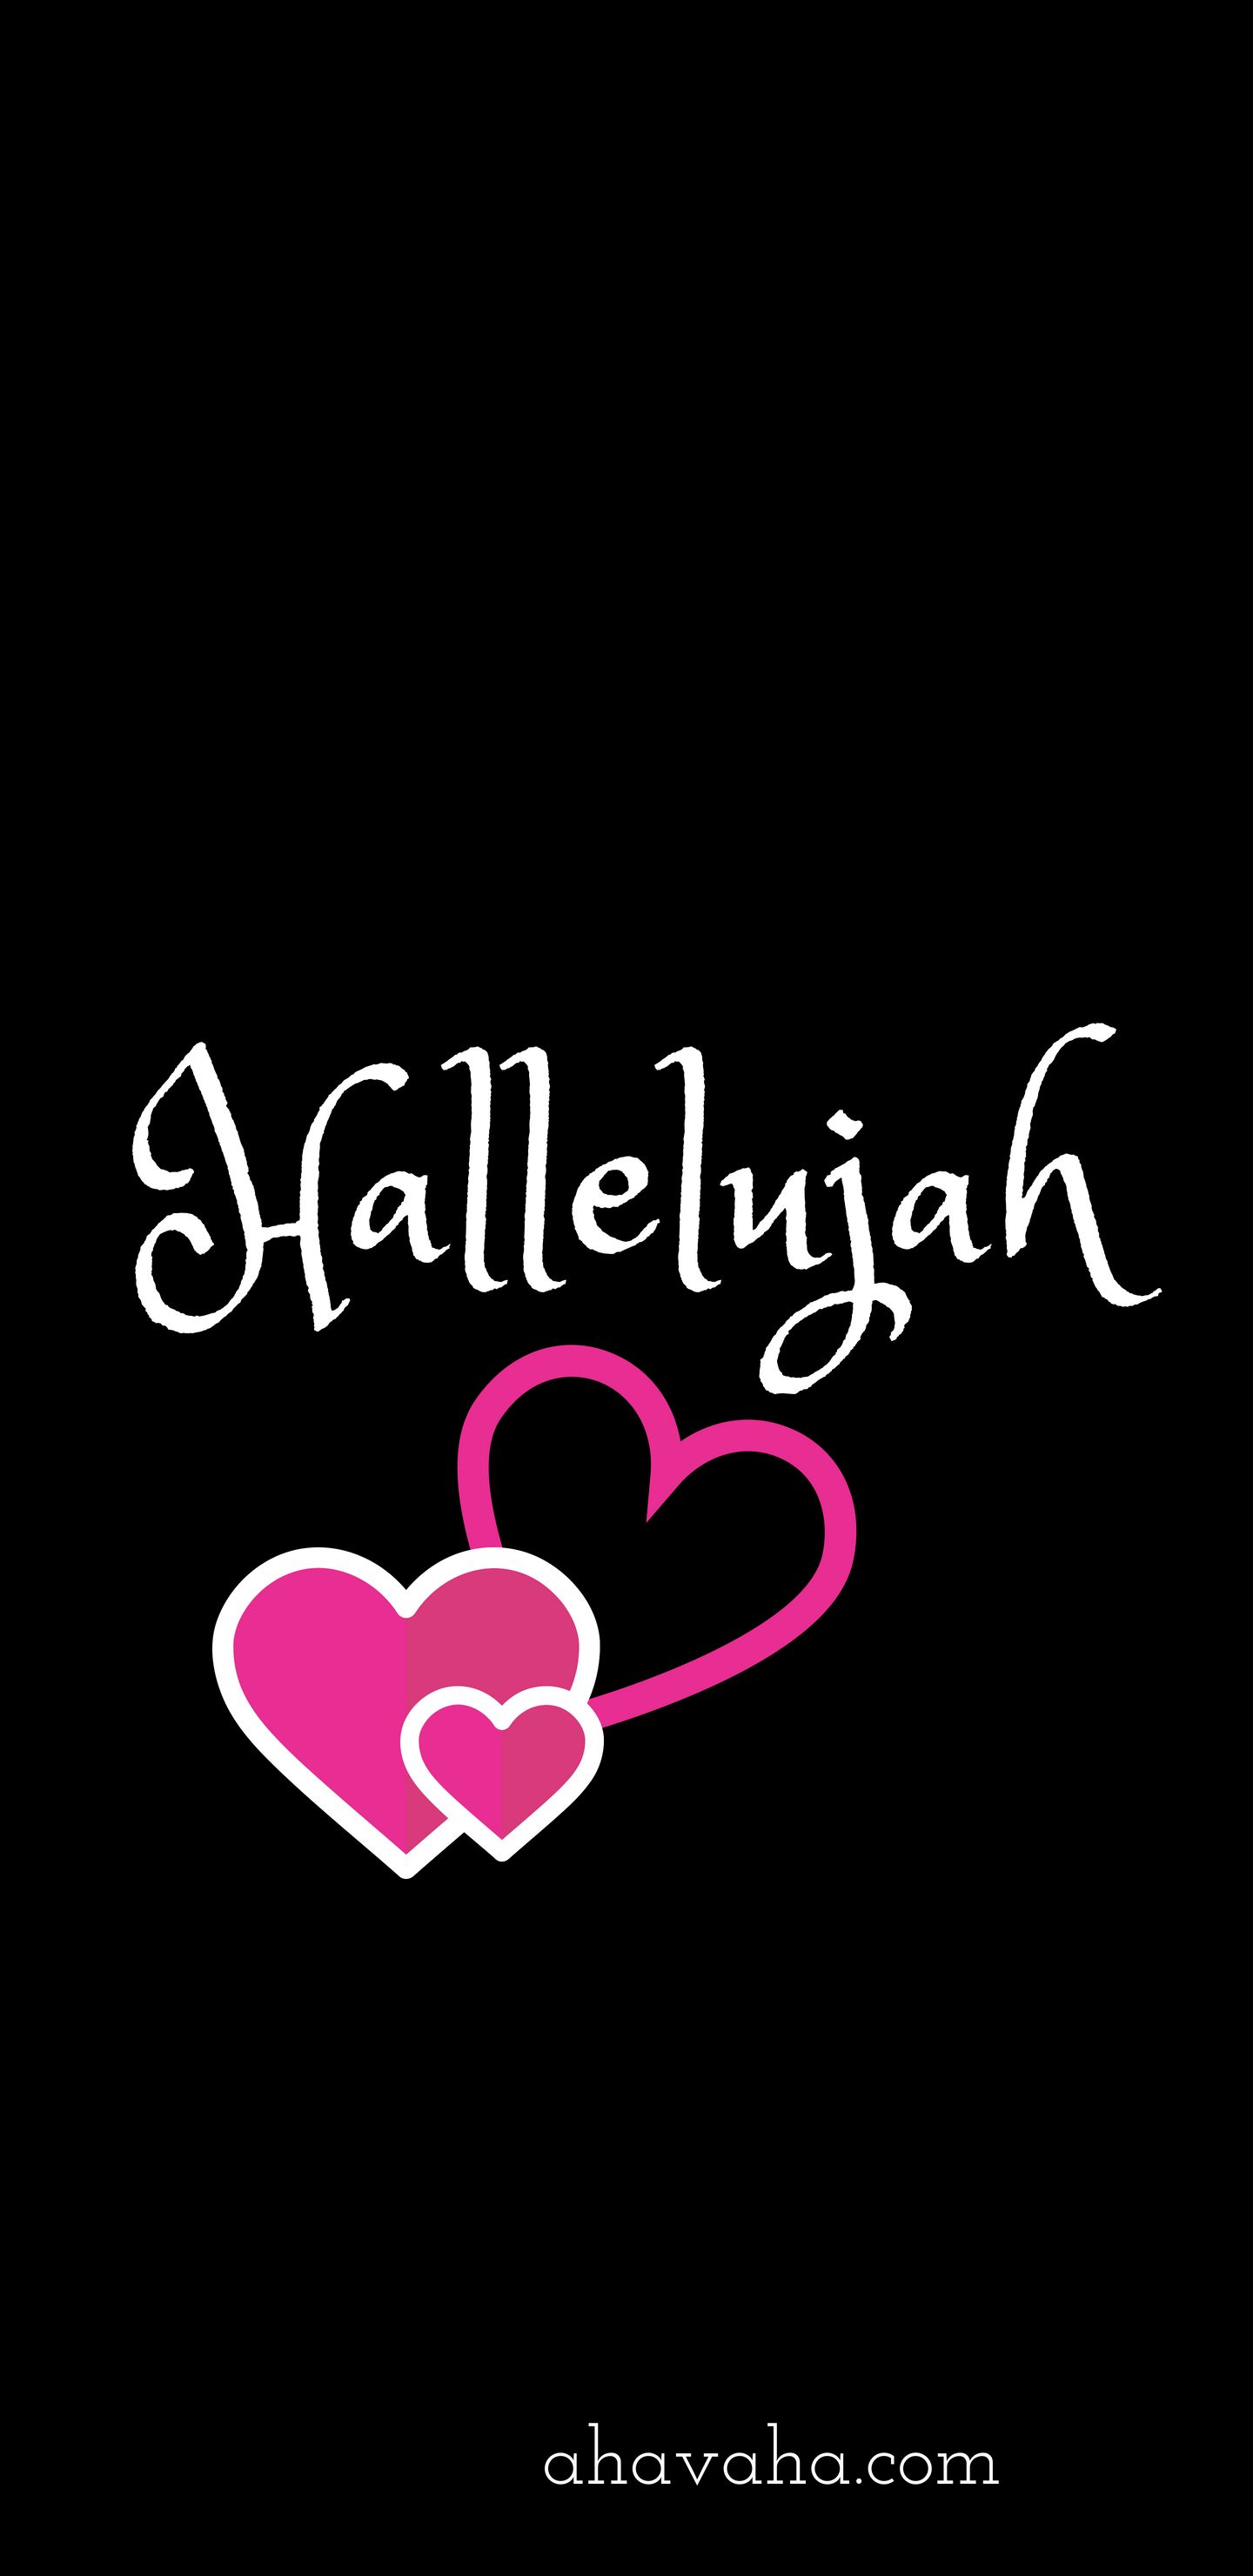 Hallelujah Love Hearts Themed Free Christian Wallpaper and Screensaver Mobile Phone Black Background 26